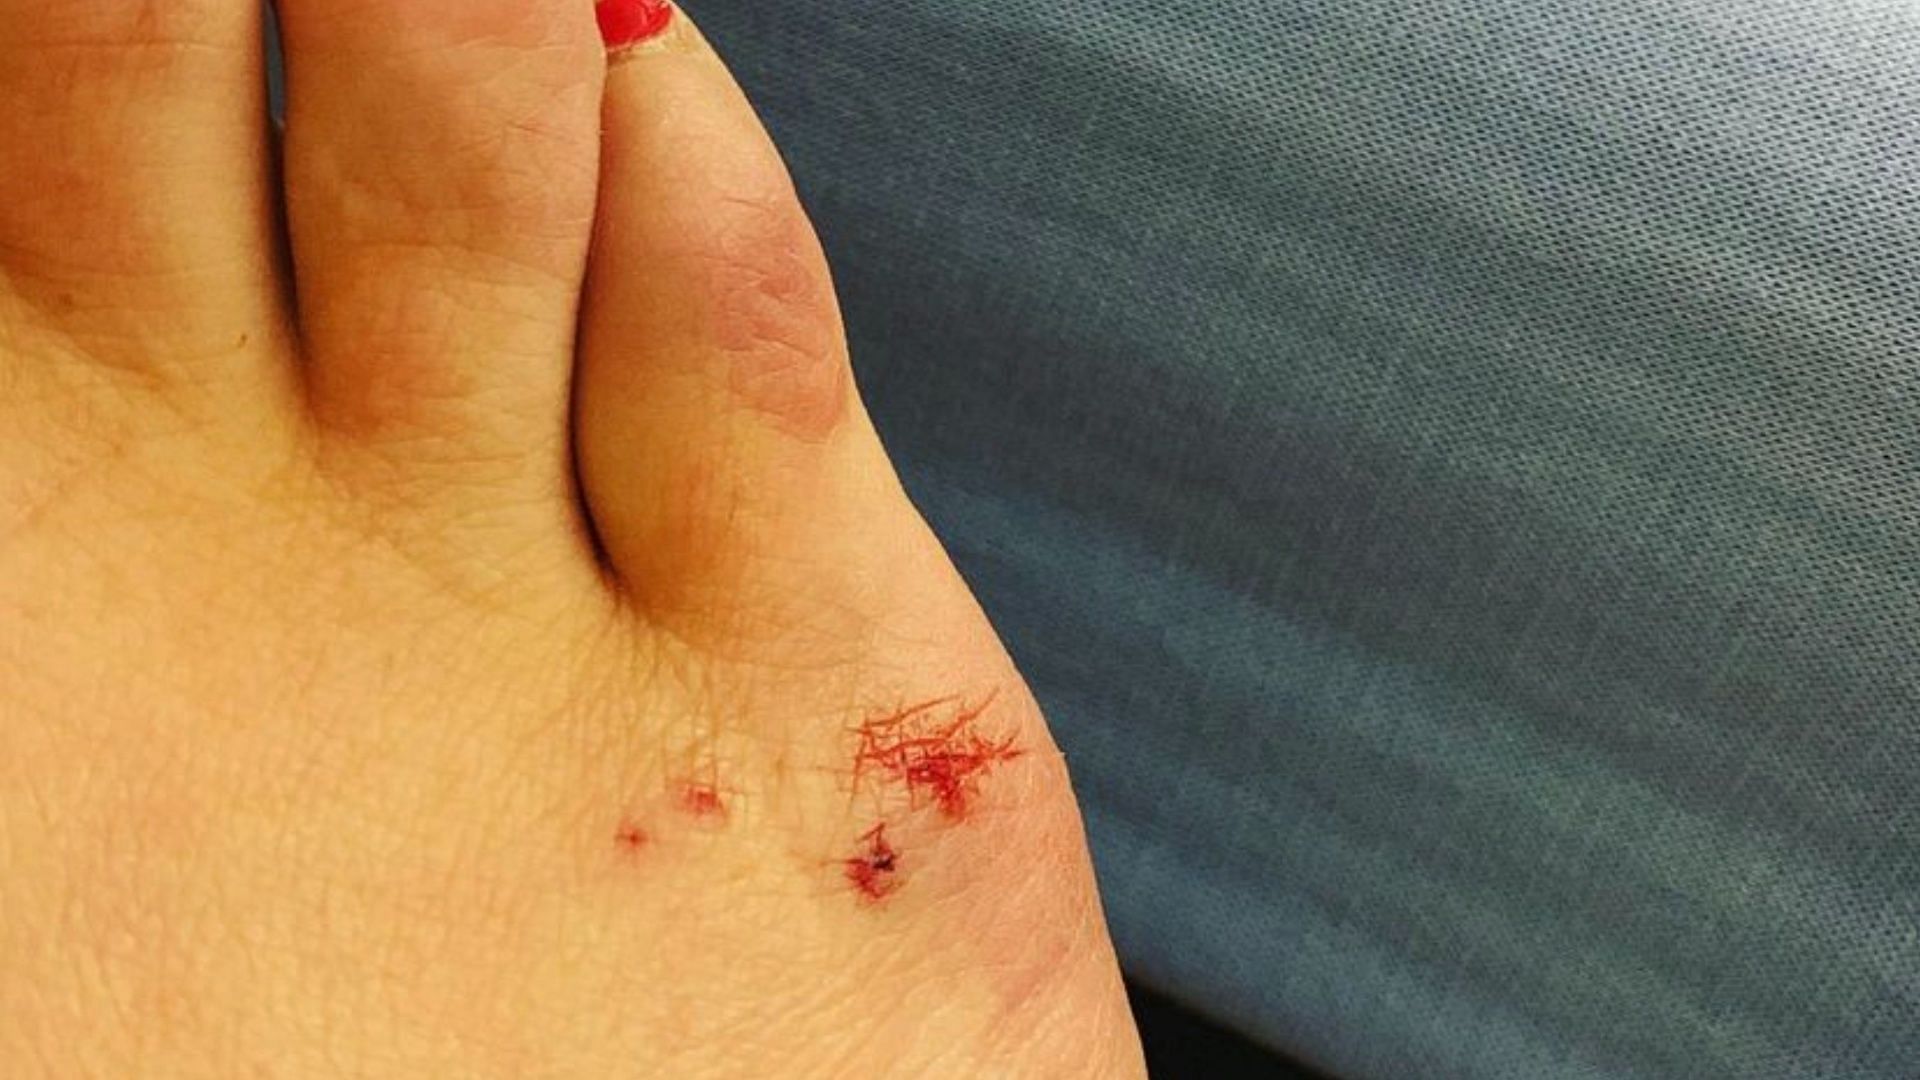 Symptoms of rat bites can include swelling, bleeding, and pain. (Photo via Instagram/libbykuts)